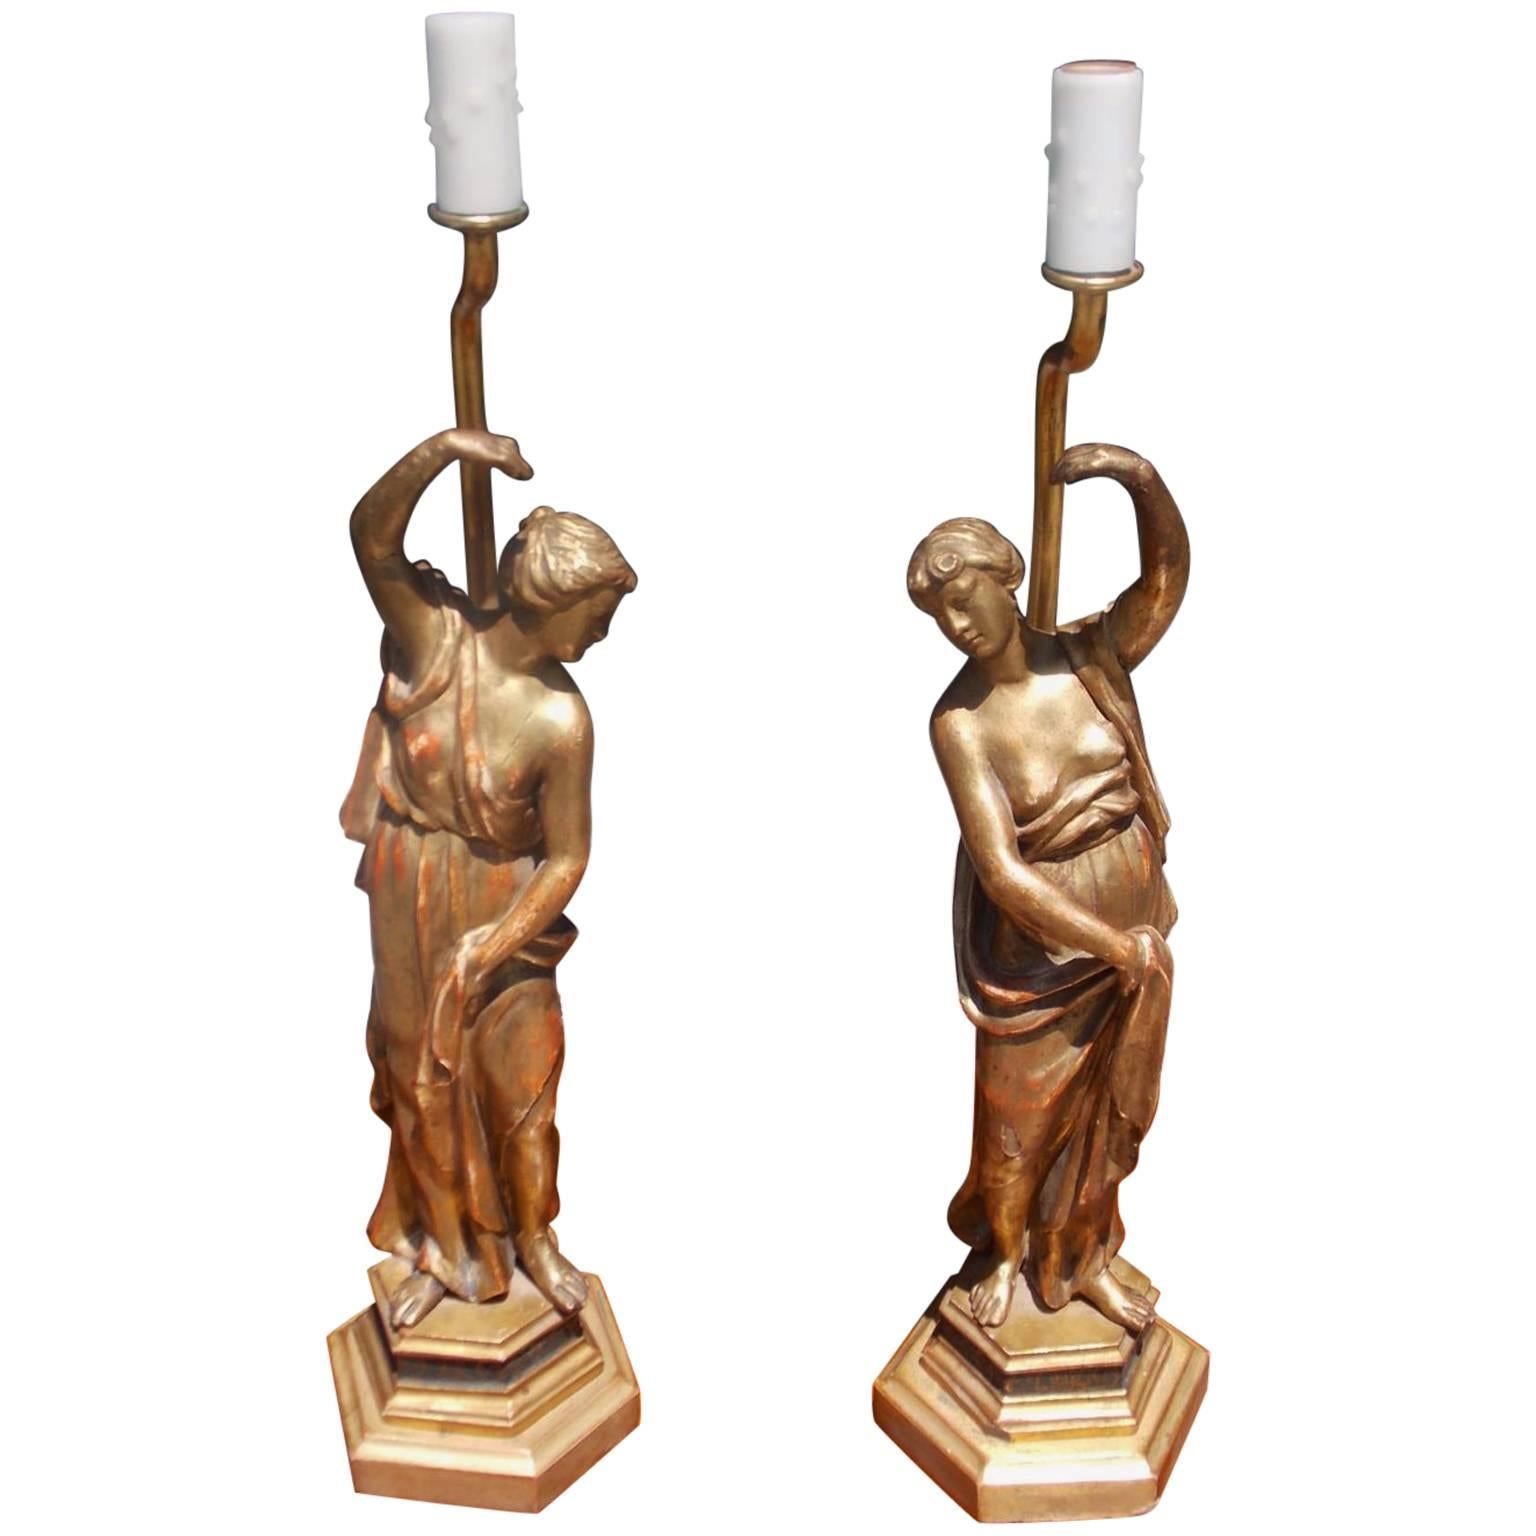 Pair of English Gilt Carved Wood Figural Statues Converted to Lamps, Circa 1780 For Sale